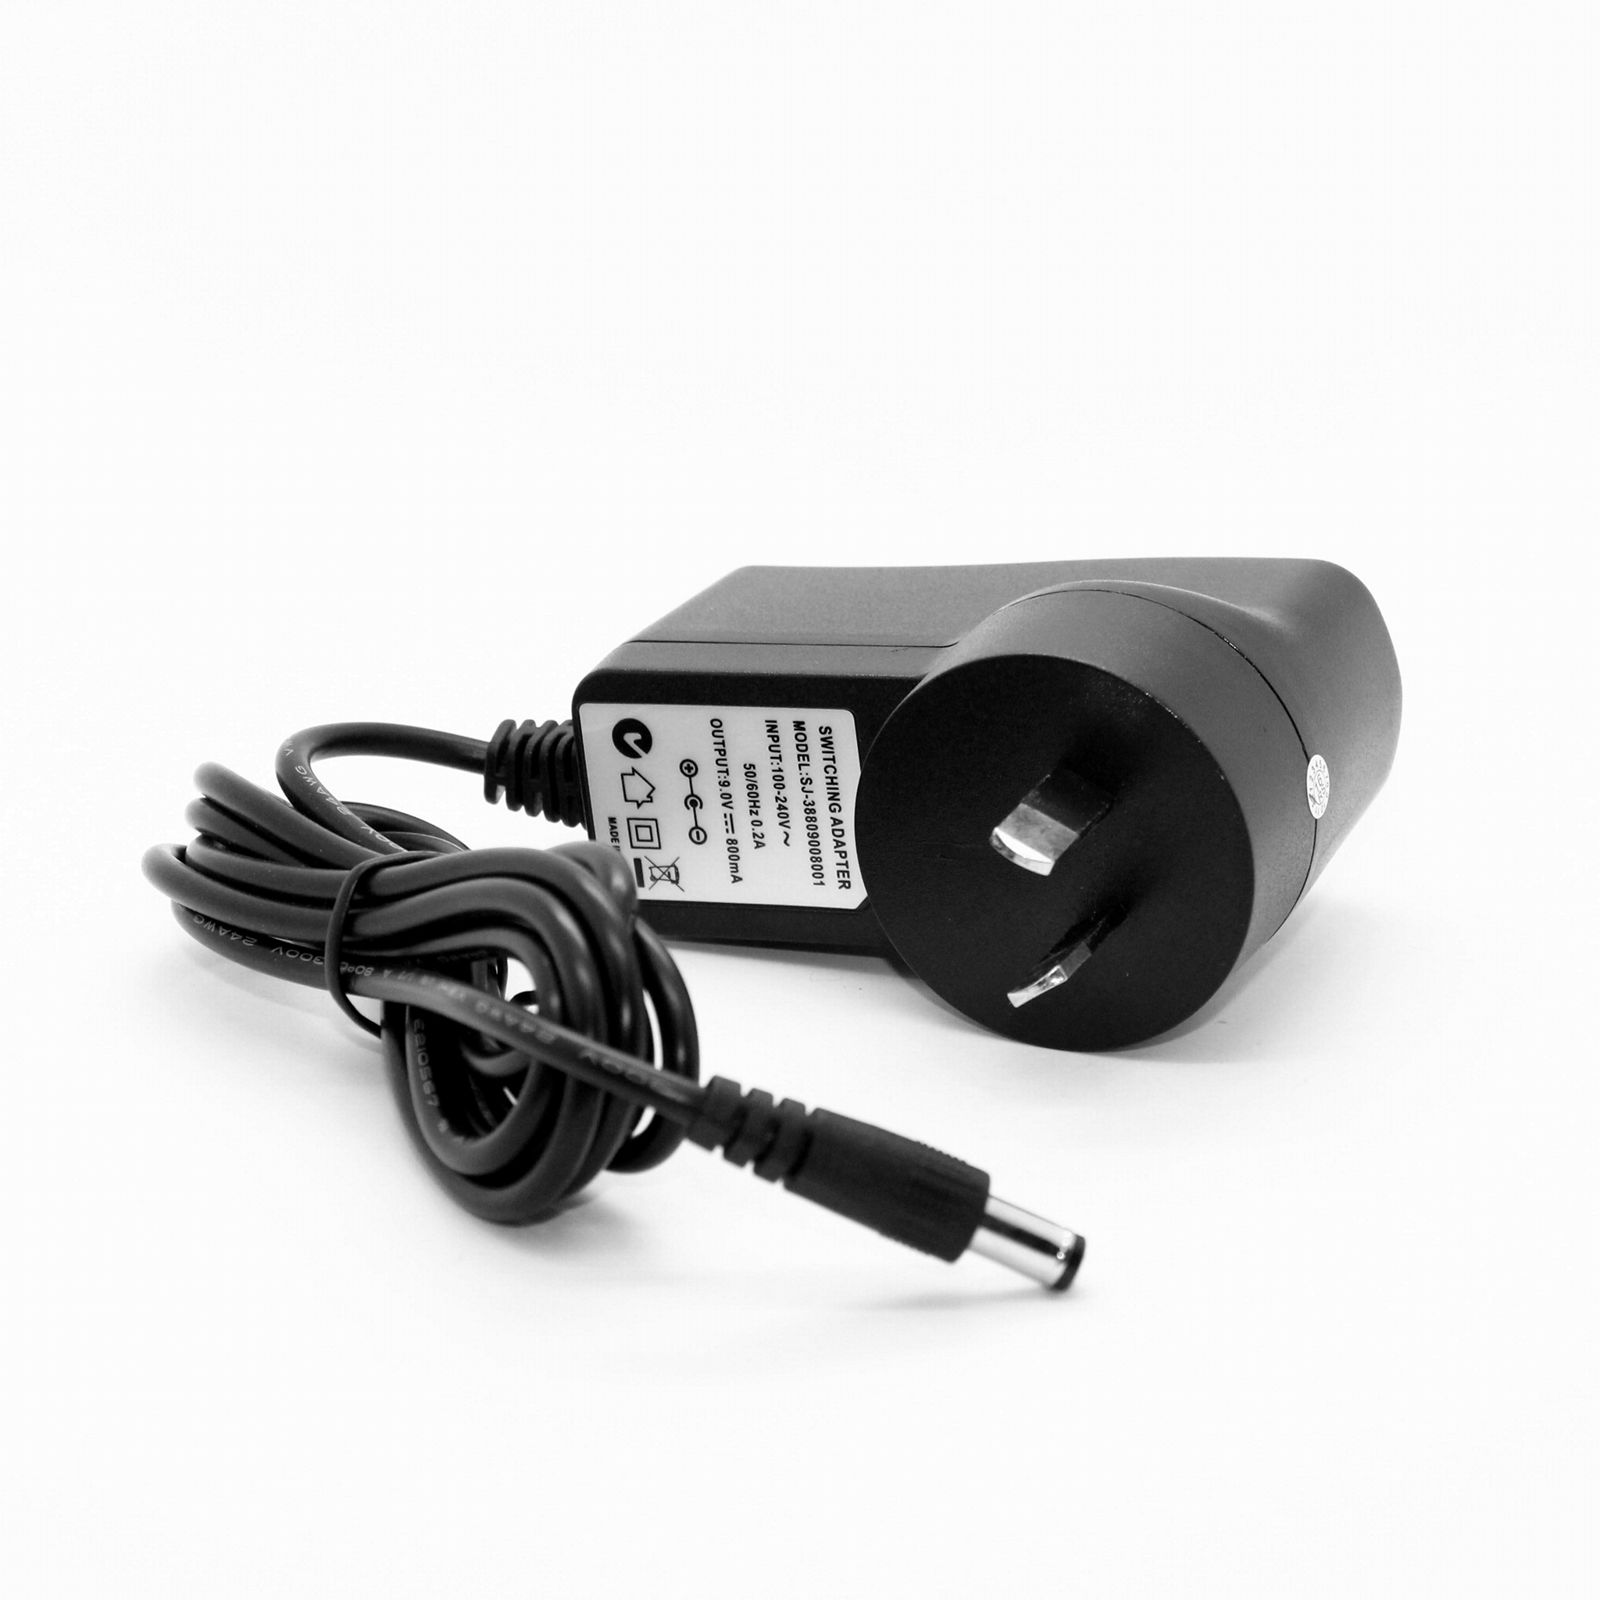 9V2A power adapter for smart home system power supply AC/DC adapter